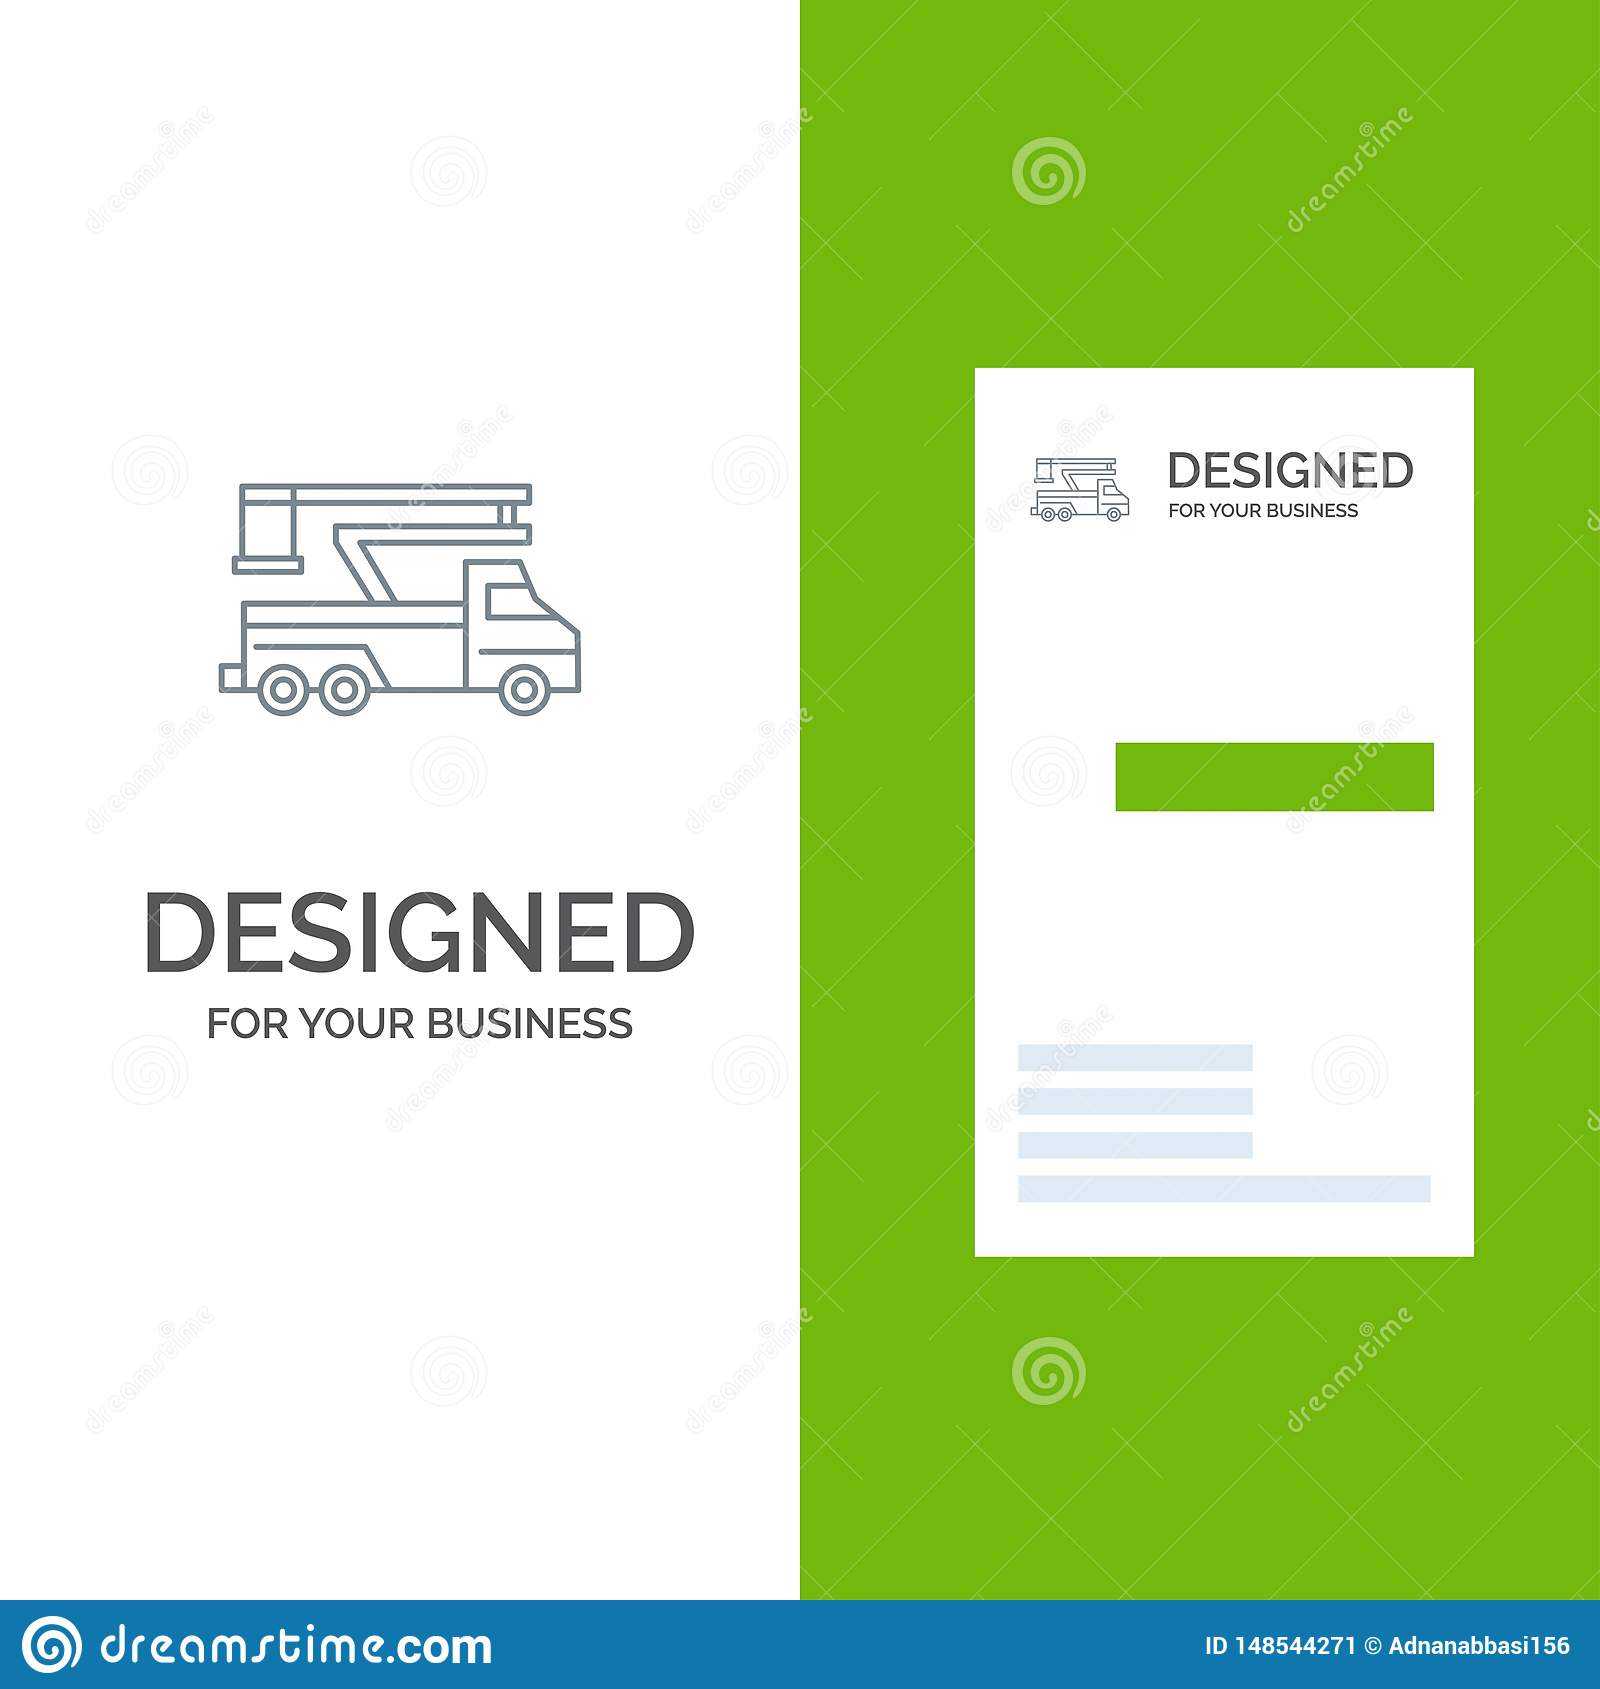 Crane, Truck, Lift, Lifting, Transport Grey Logo Design And Pertaining To Transport Business Cards Templates Free